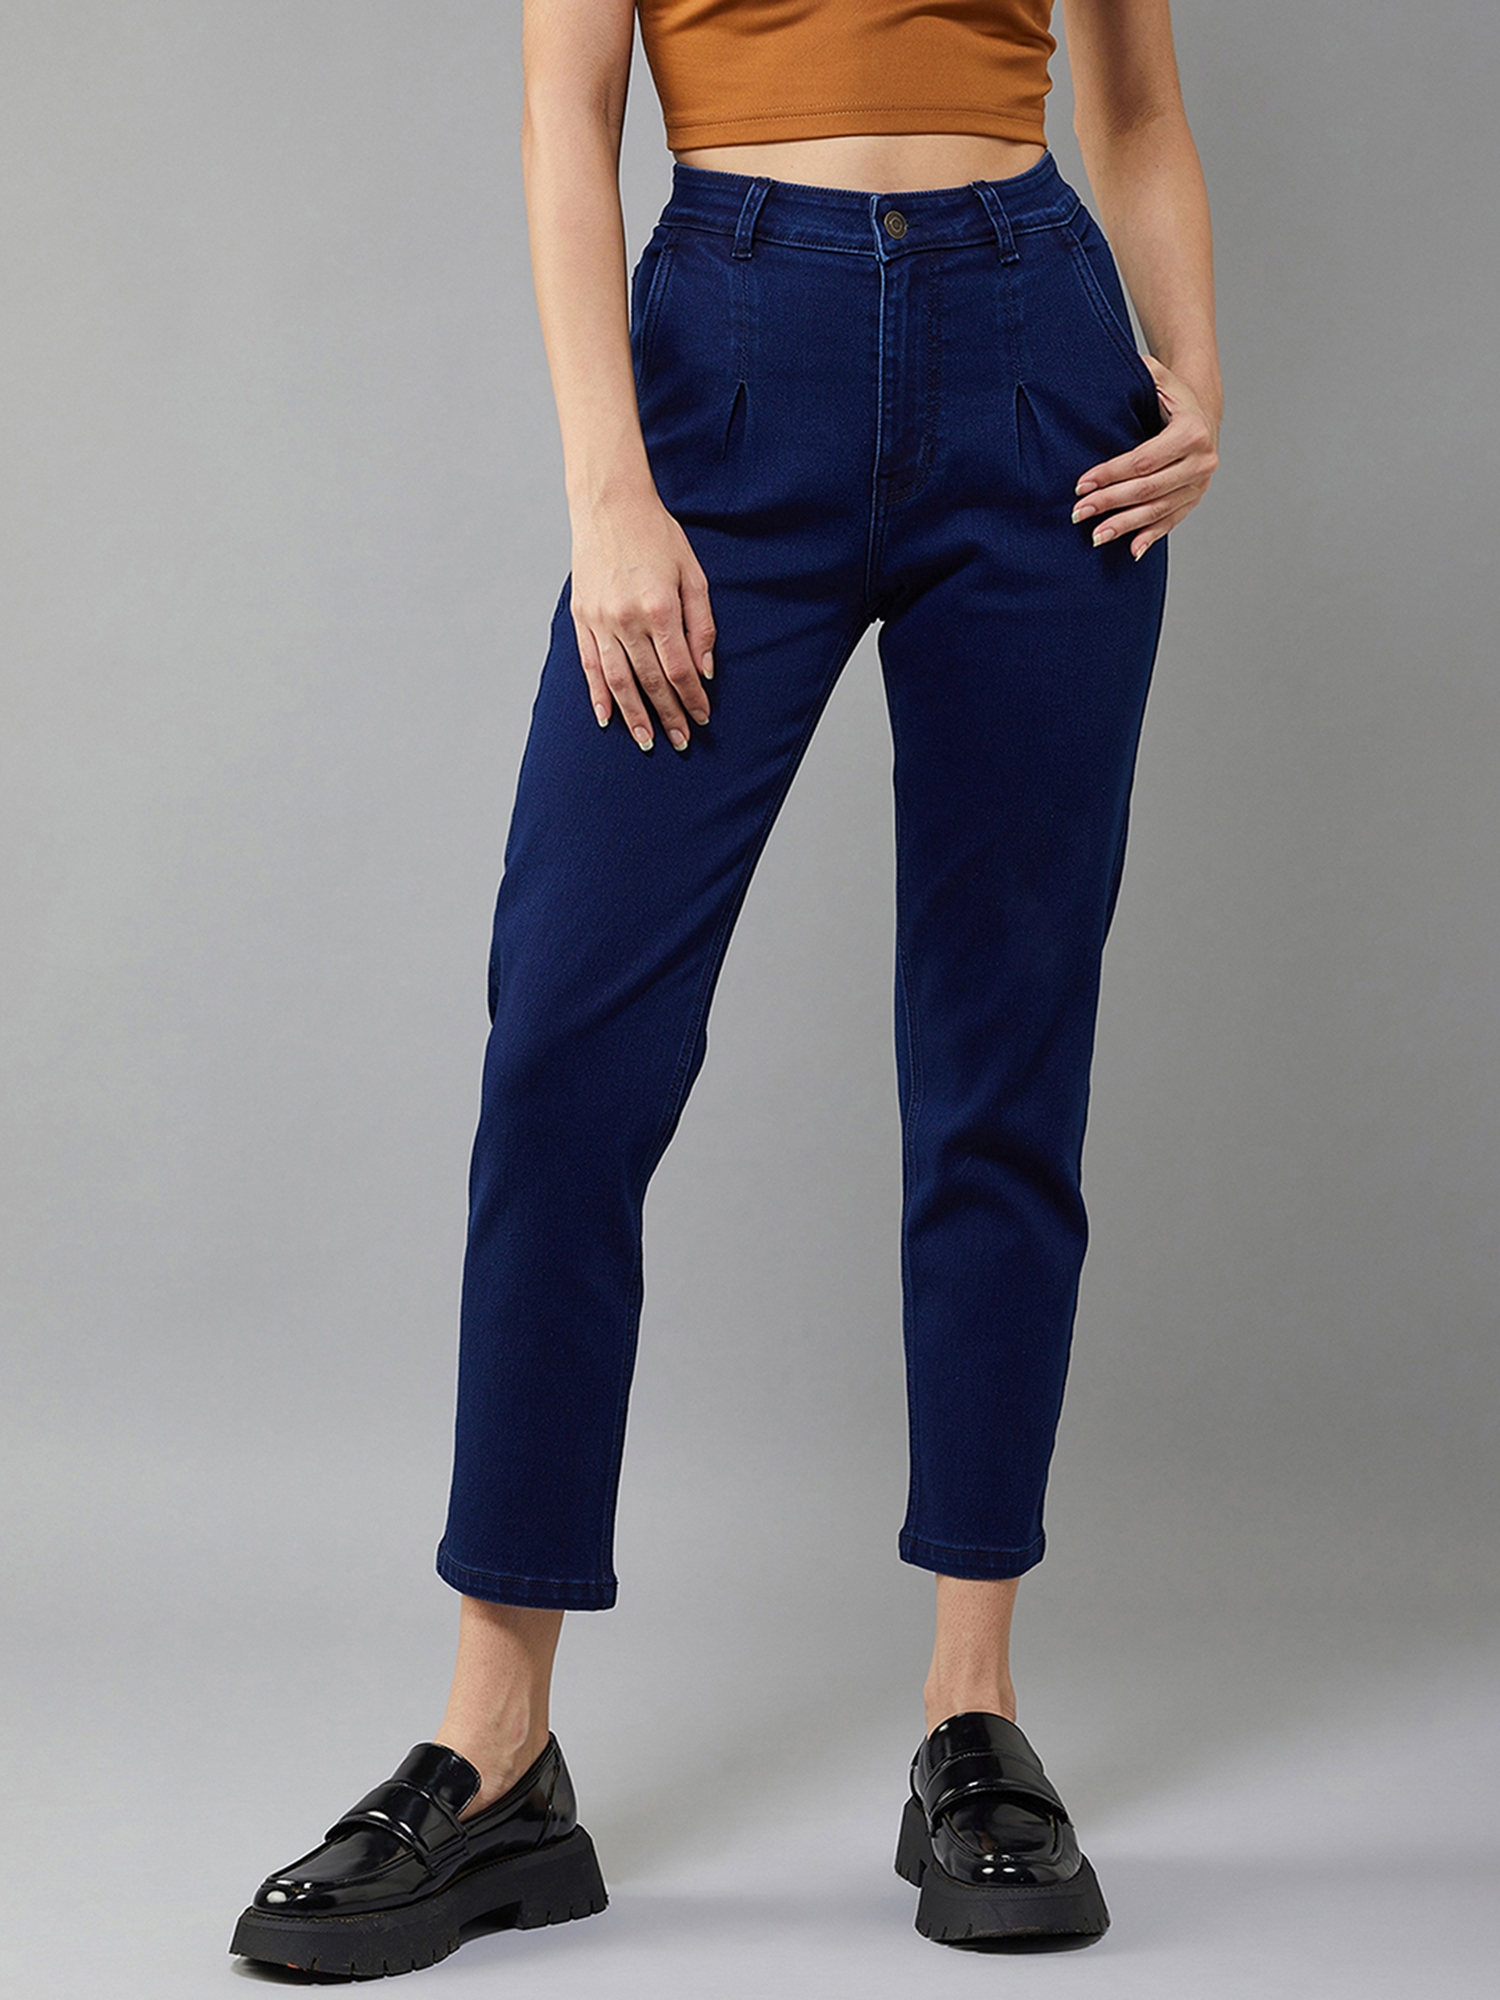 Women's Navy Blue Tapered Fit High Rise Clean Look Regular Stretchable Denim Jeans